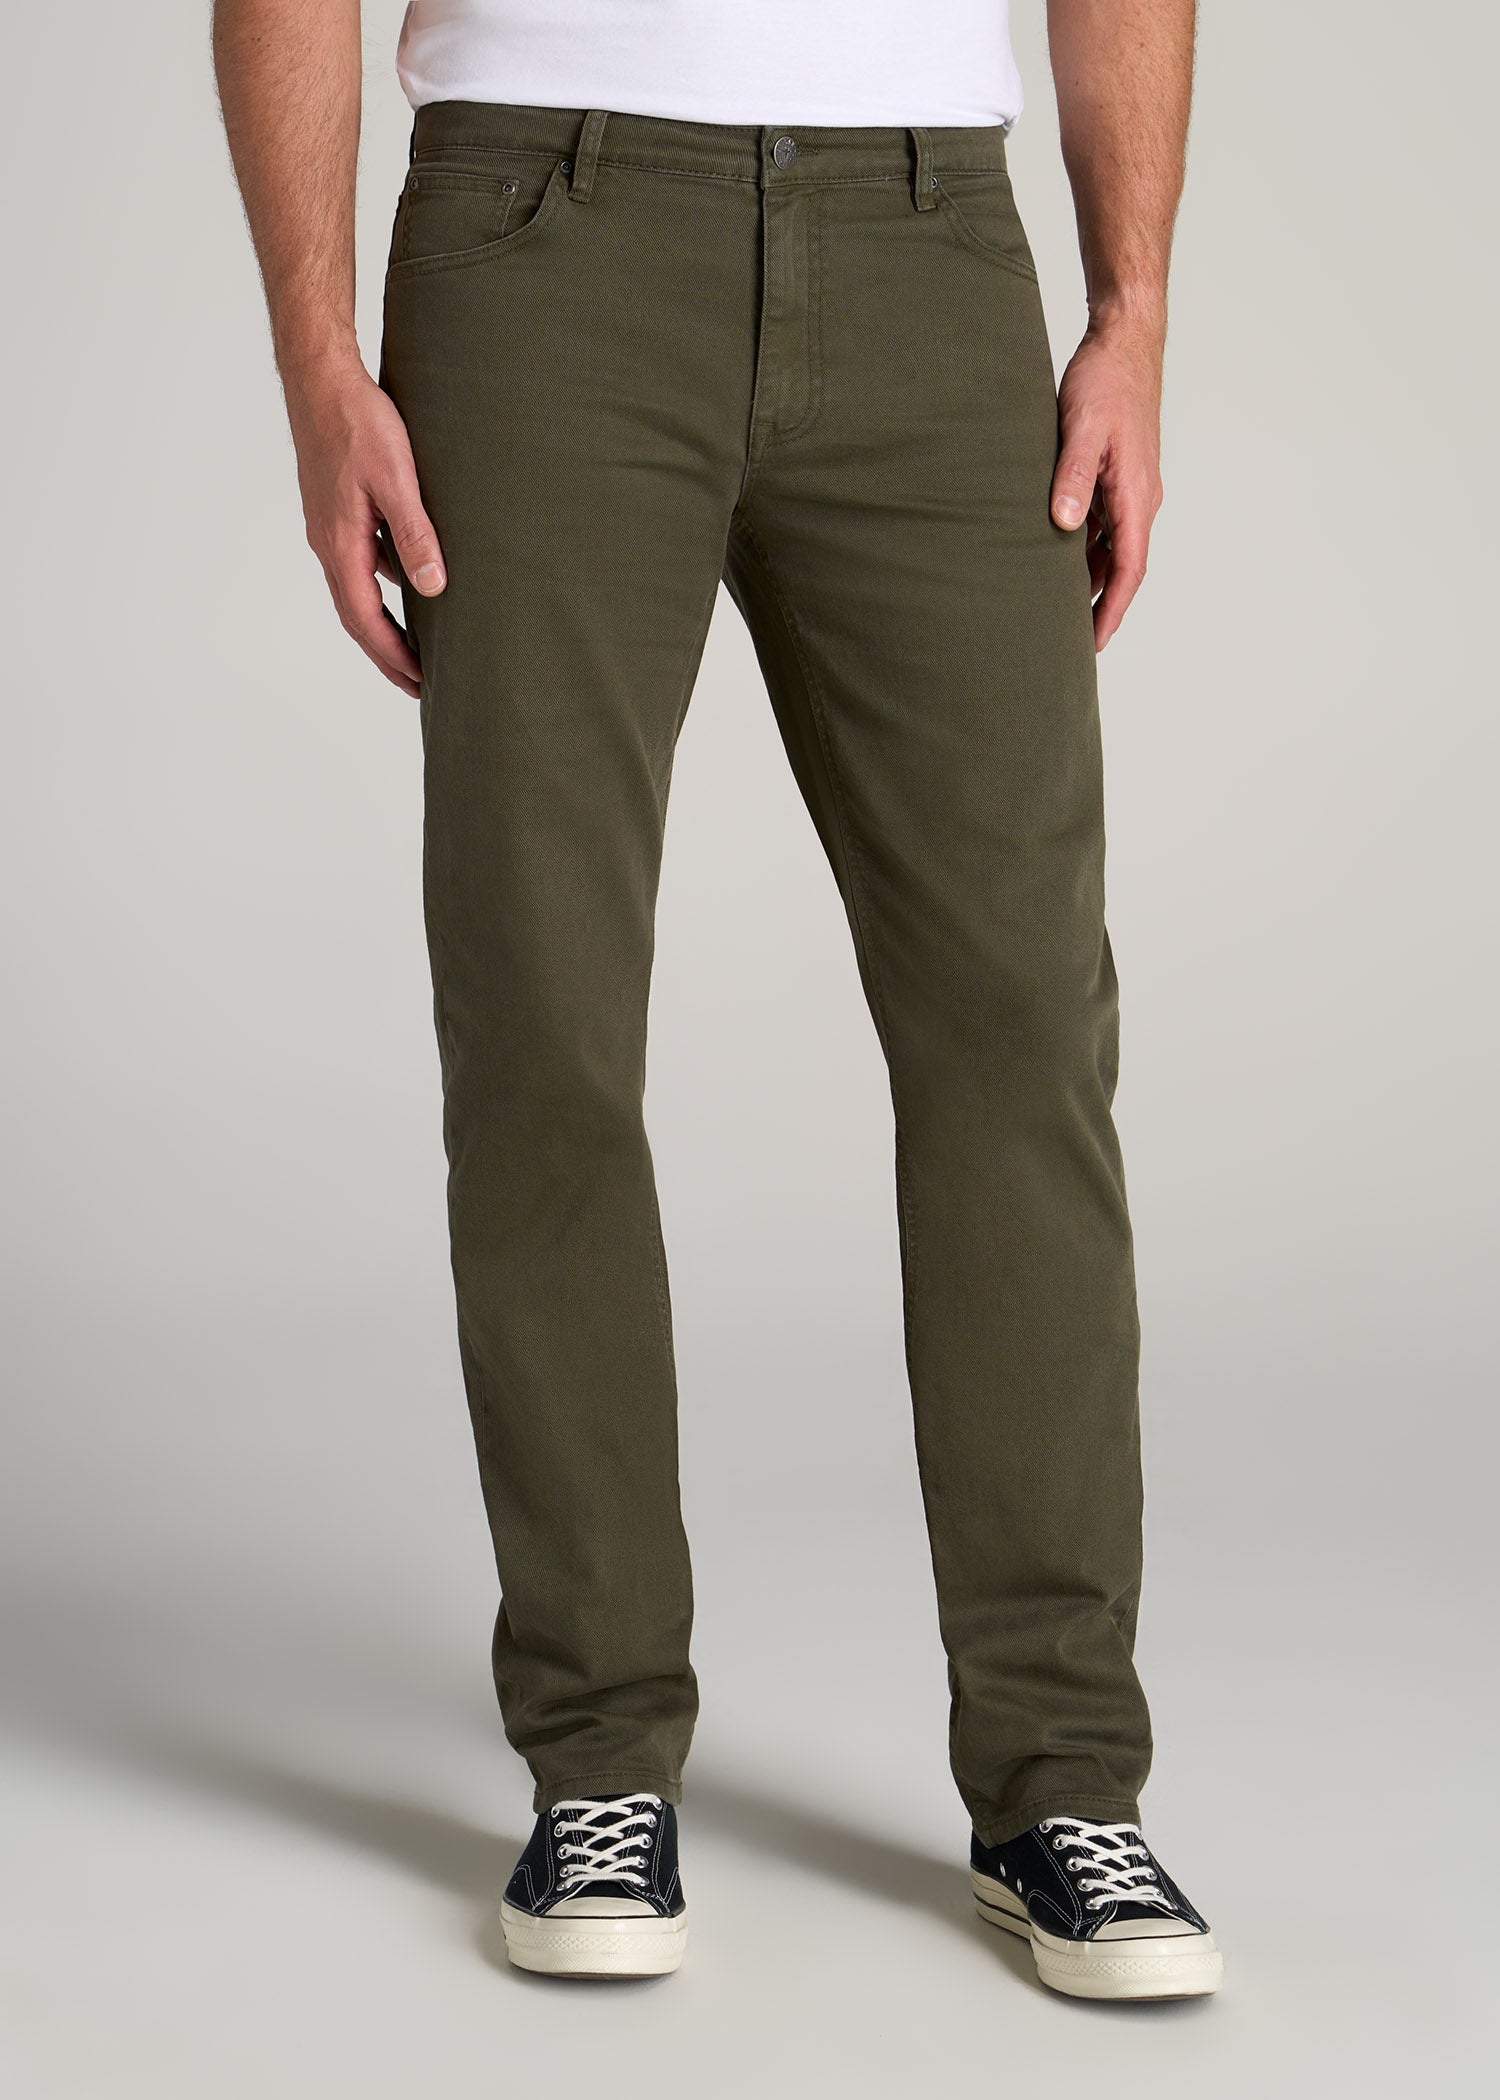 Men's Wrangler Cargo Pants w/ Stretch Relaxed Fit Olive Drab Green